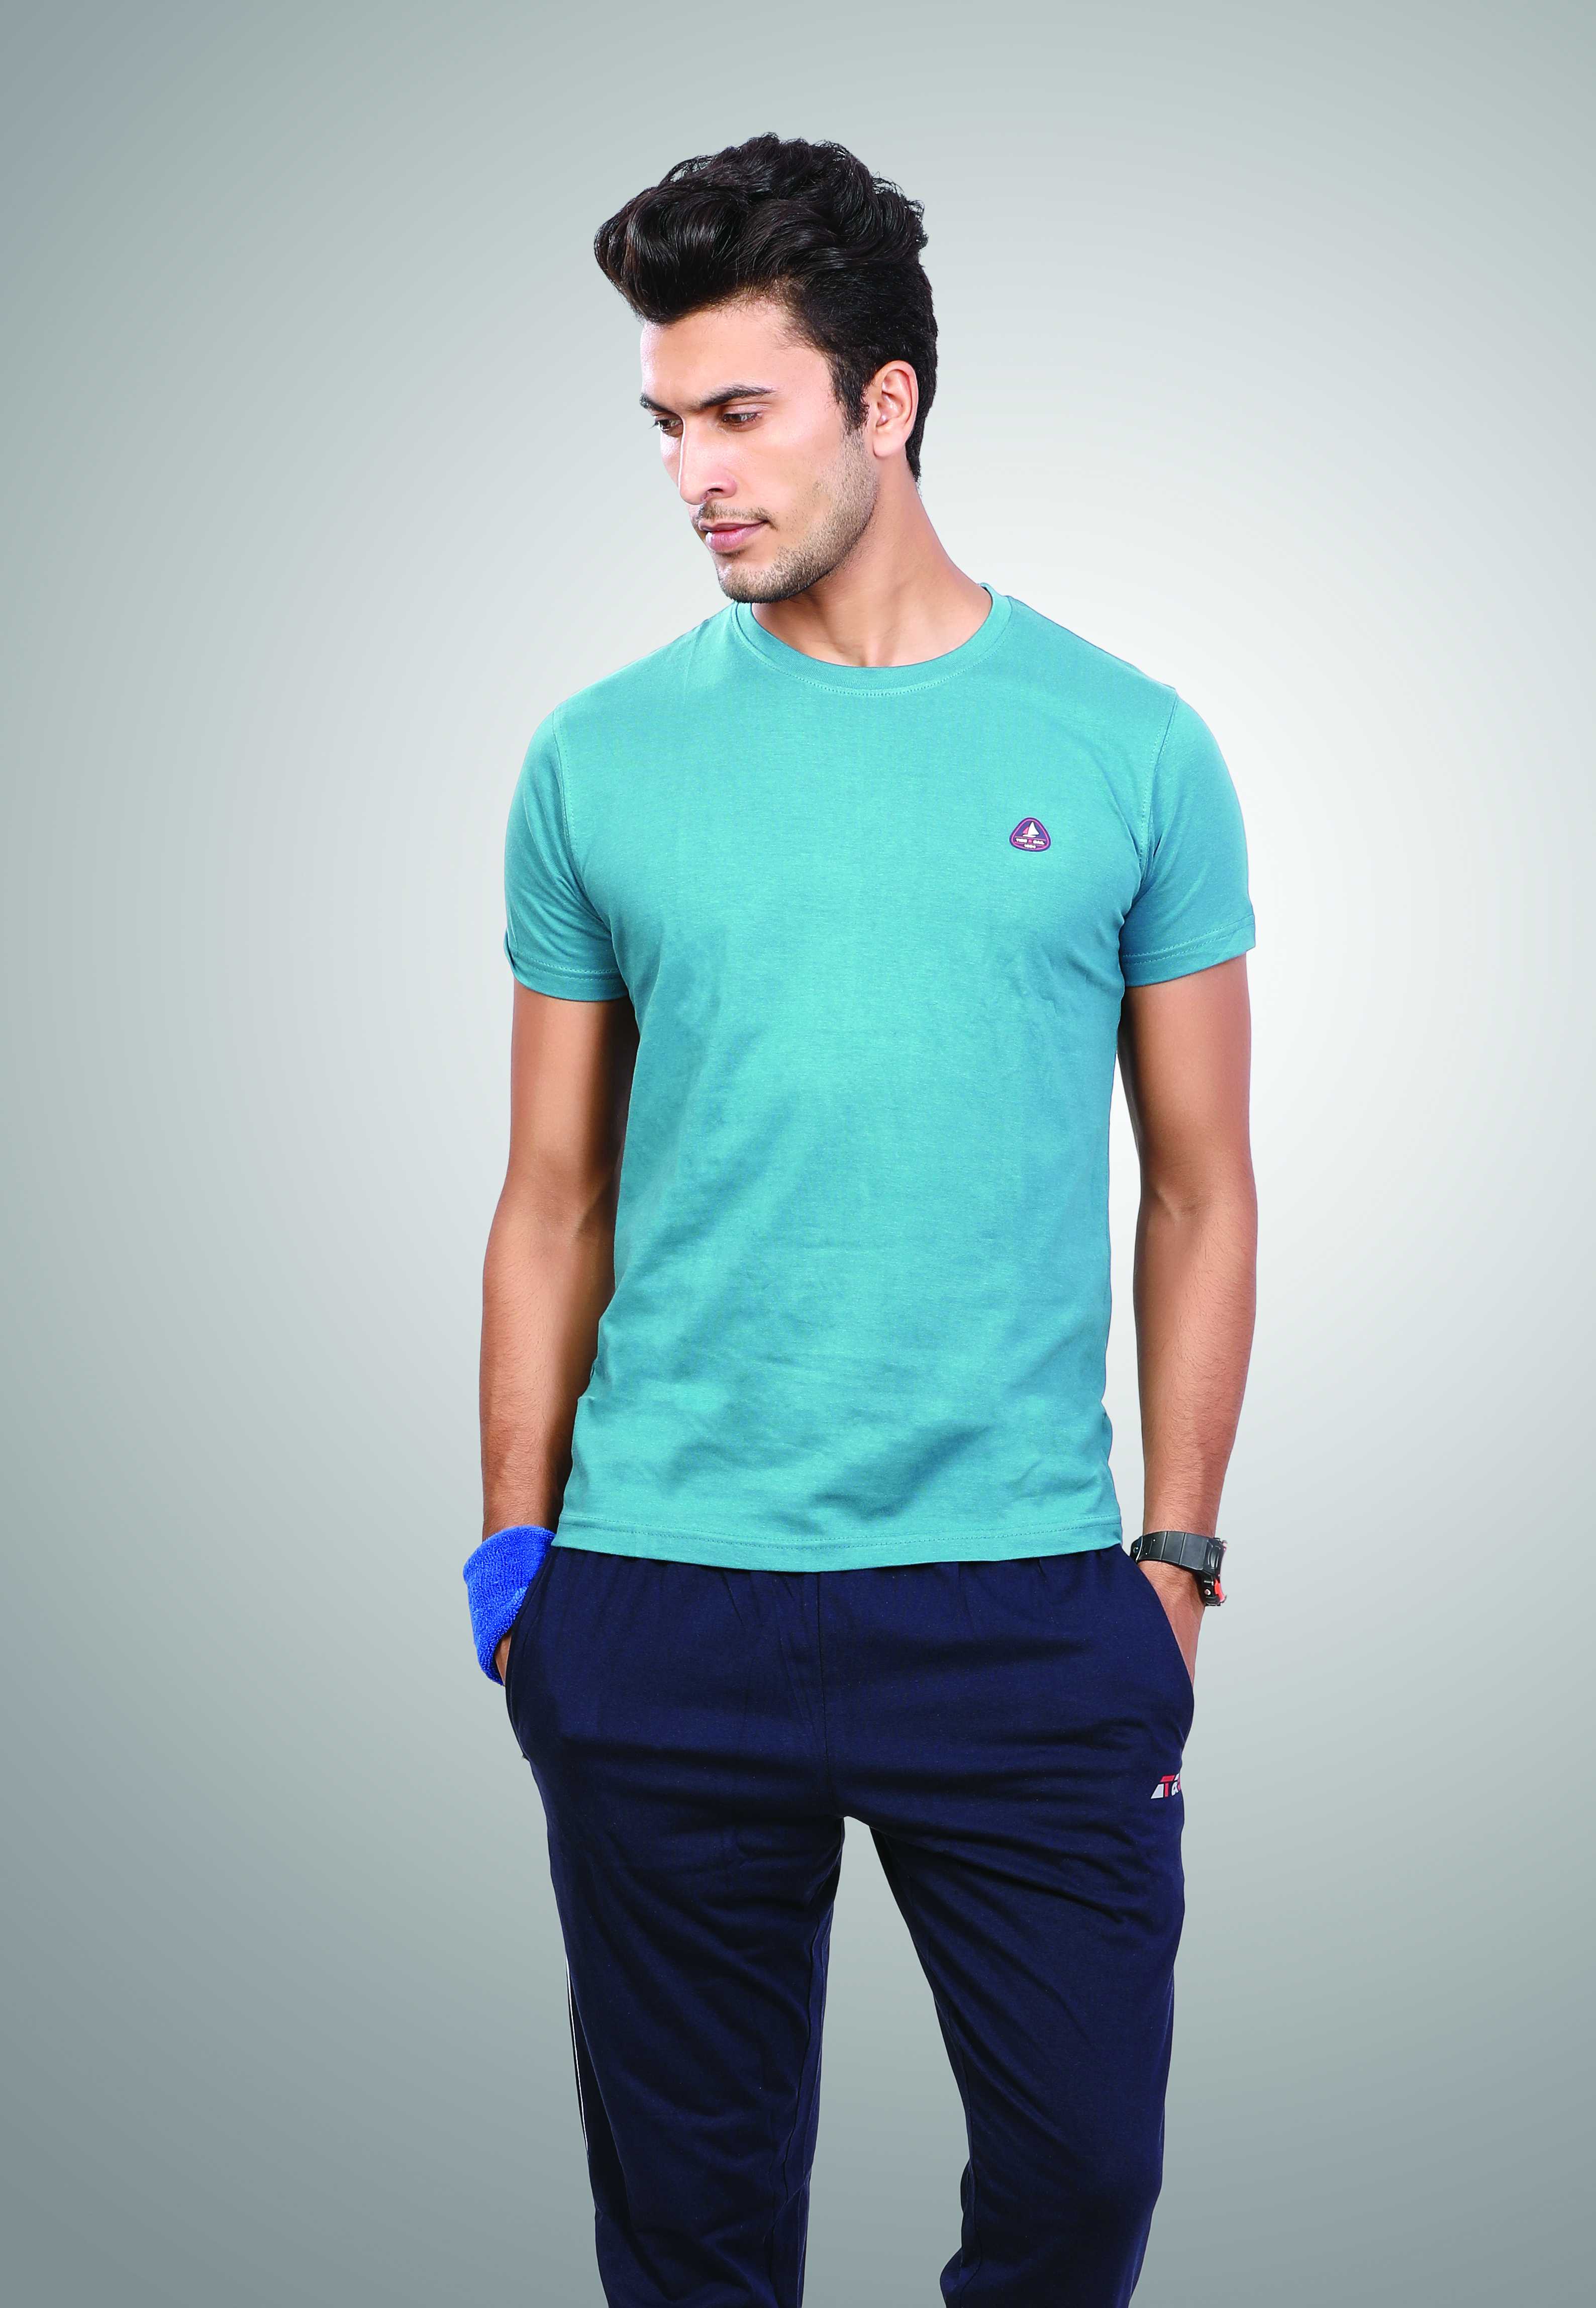 Tide and Sail - Crew Neck Tshirt - Leading Mens Tshirt Brand in India